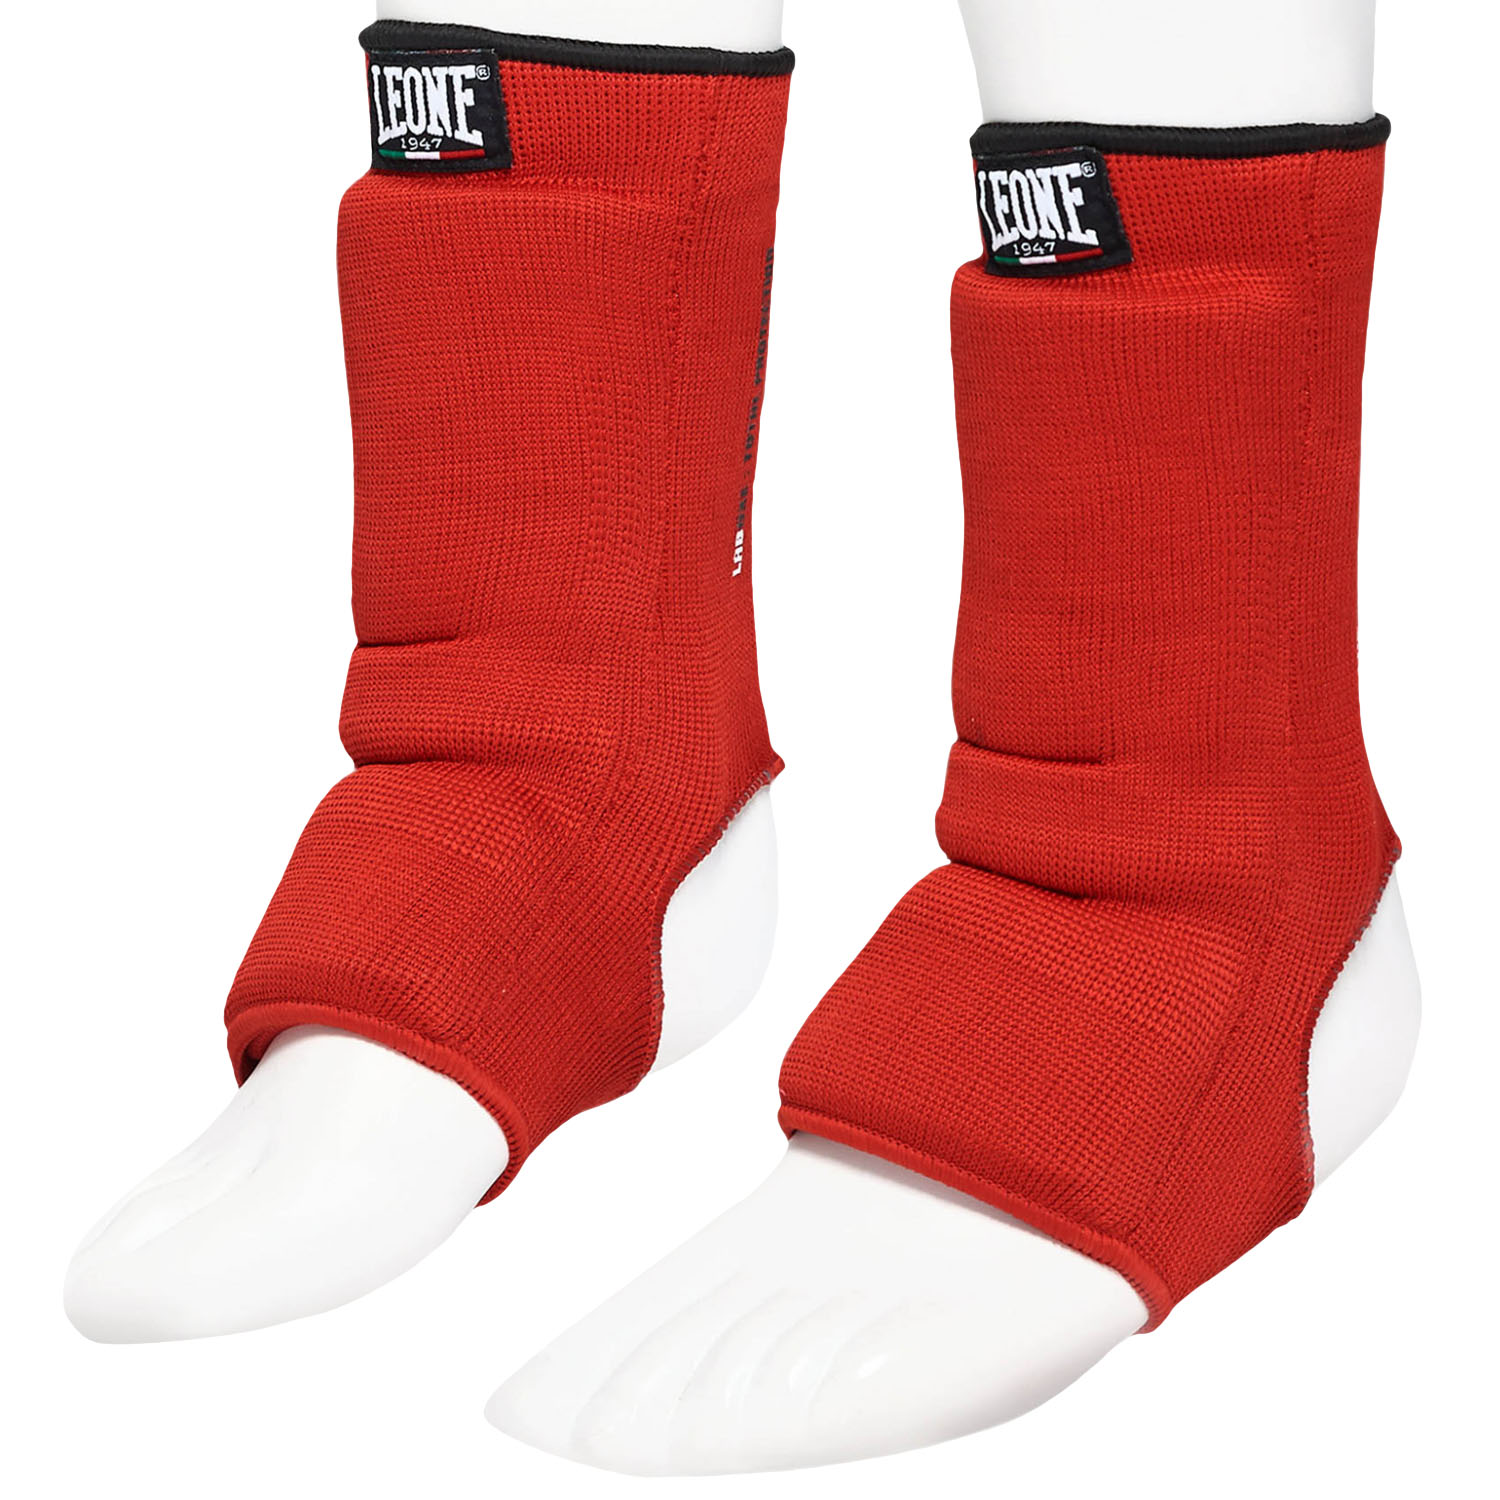 LEONE Ankle Guards, Padded Ankleguards, red, L